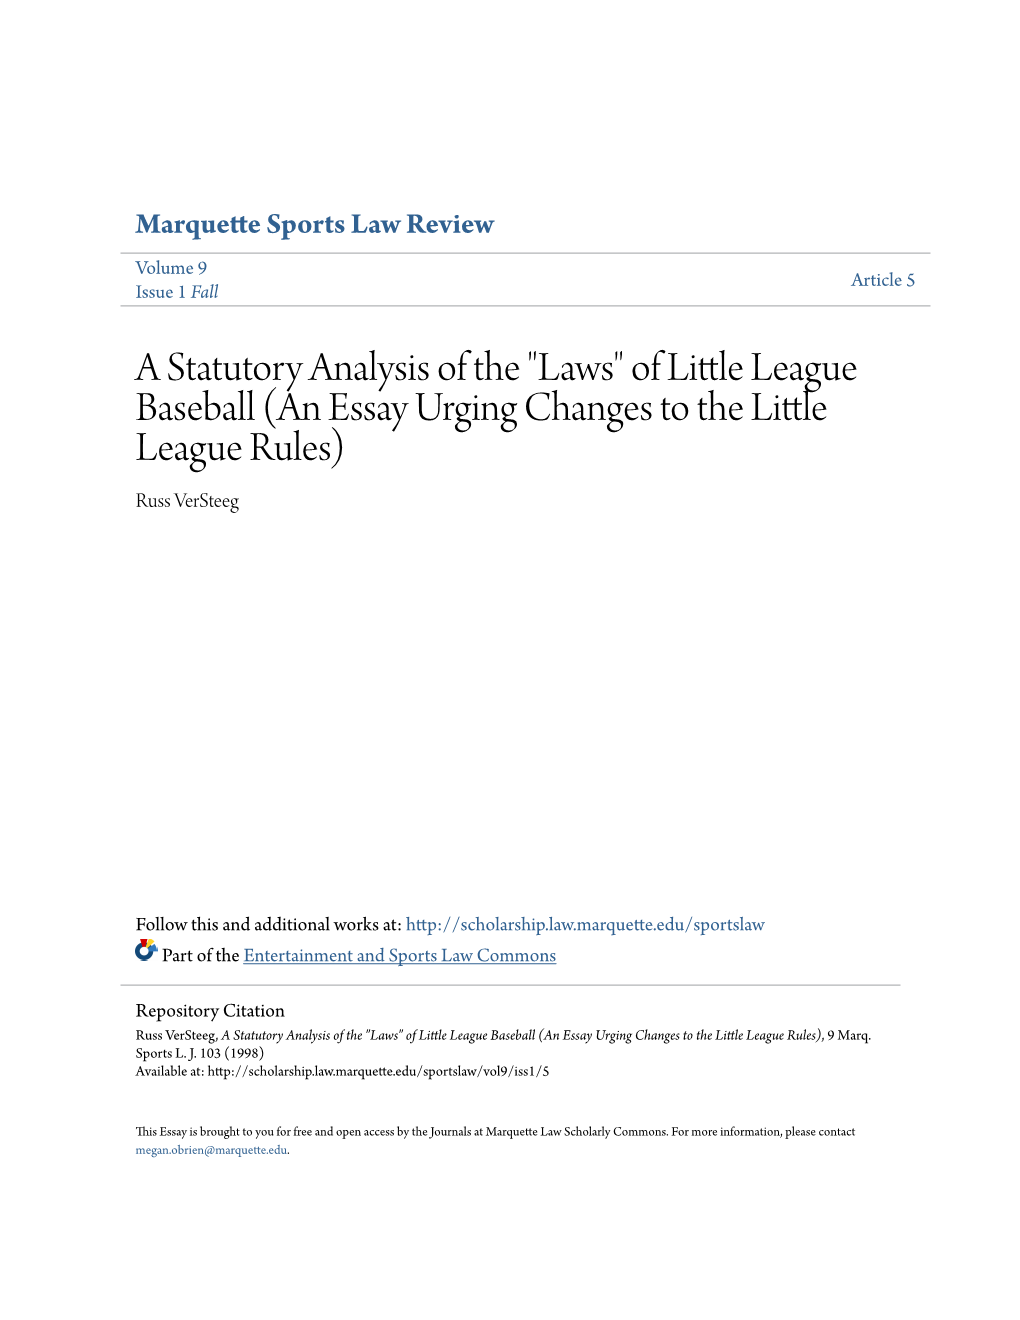 "Laws" of Little League Baseball (An Essay Urging Changes to the Little League Rules) Russ Versteeg